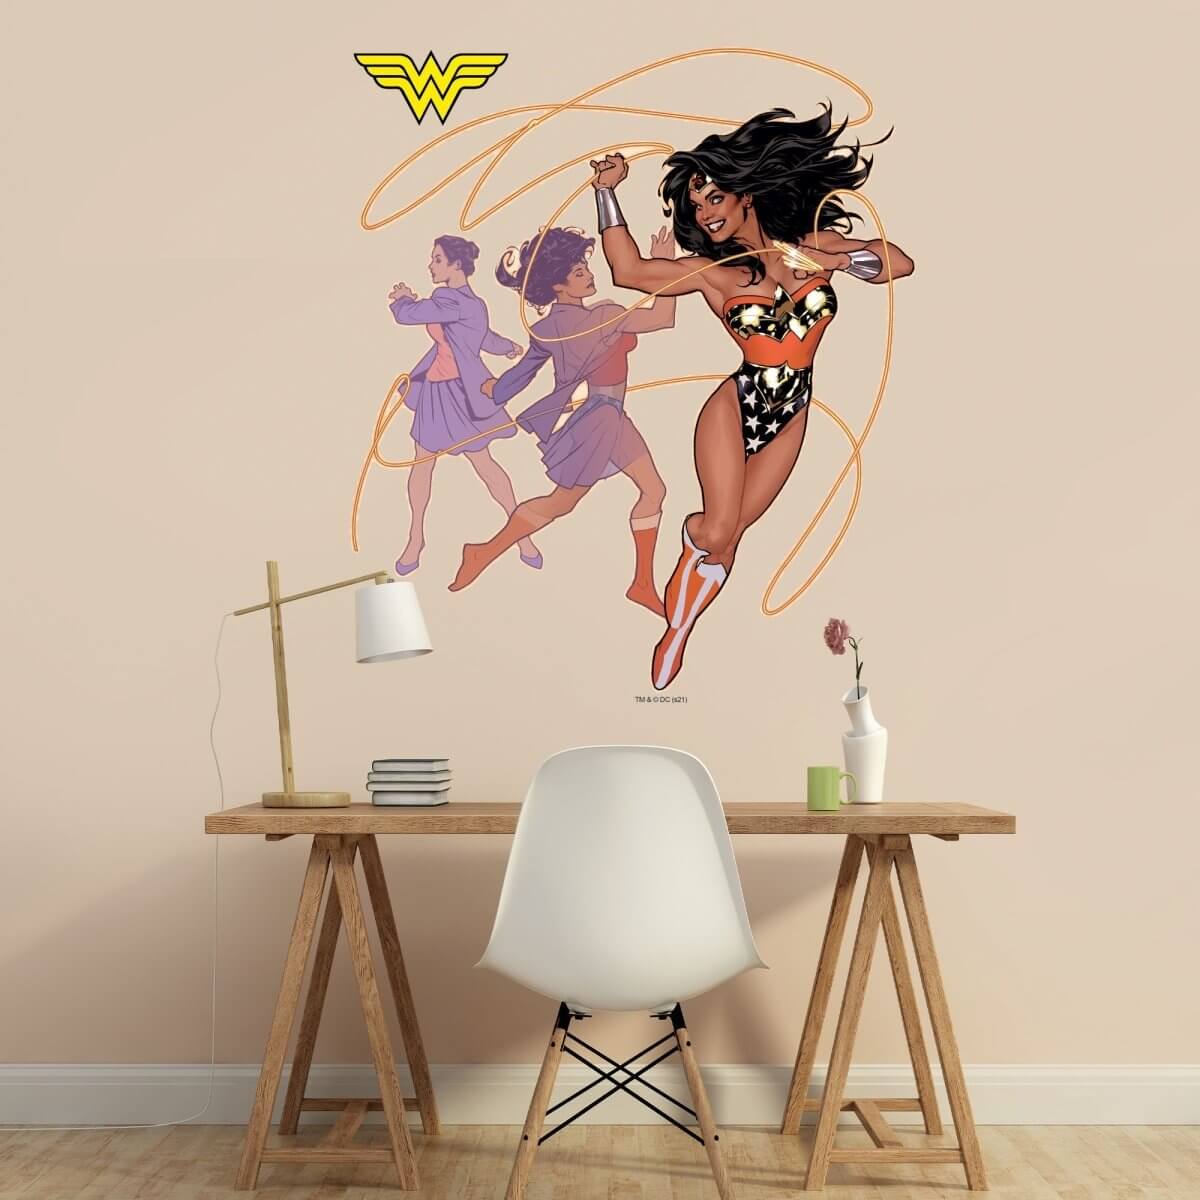 Kismet Decals Wonder Woman: Ultimate Guide Comic Cover Series Officially Licensed Wall Sticker - Easy DIY DC Comics Home, Kids or Adult Bedroom, Office, Living Room Decor Wall Art - Kismet Decals